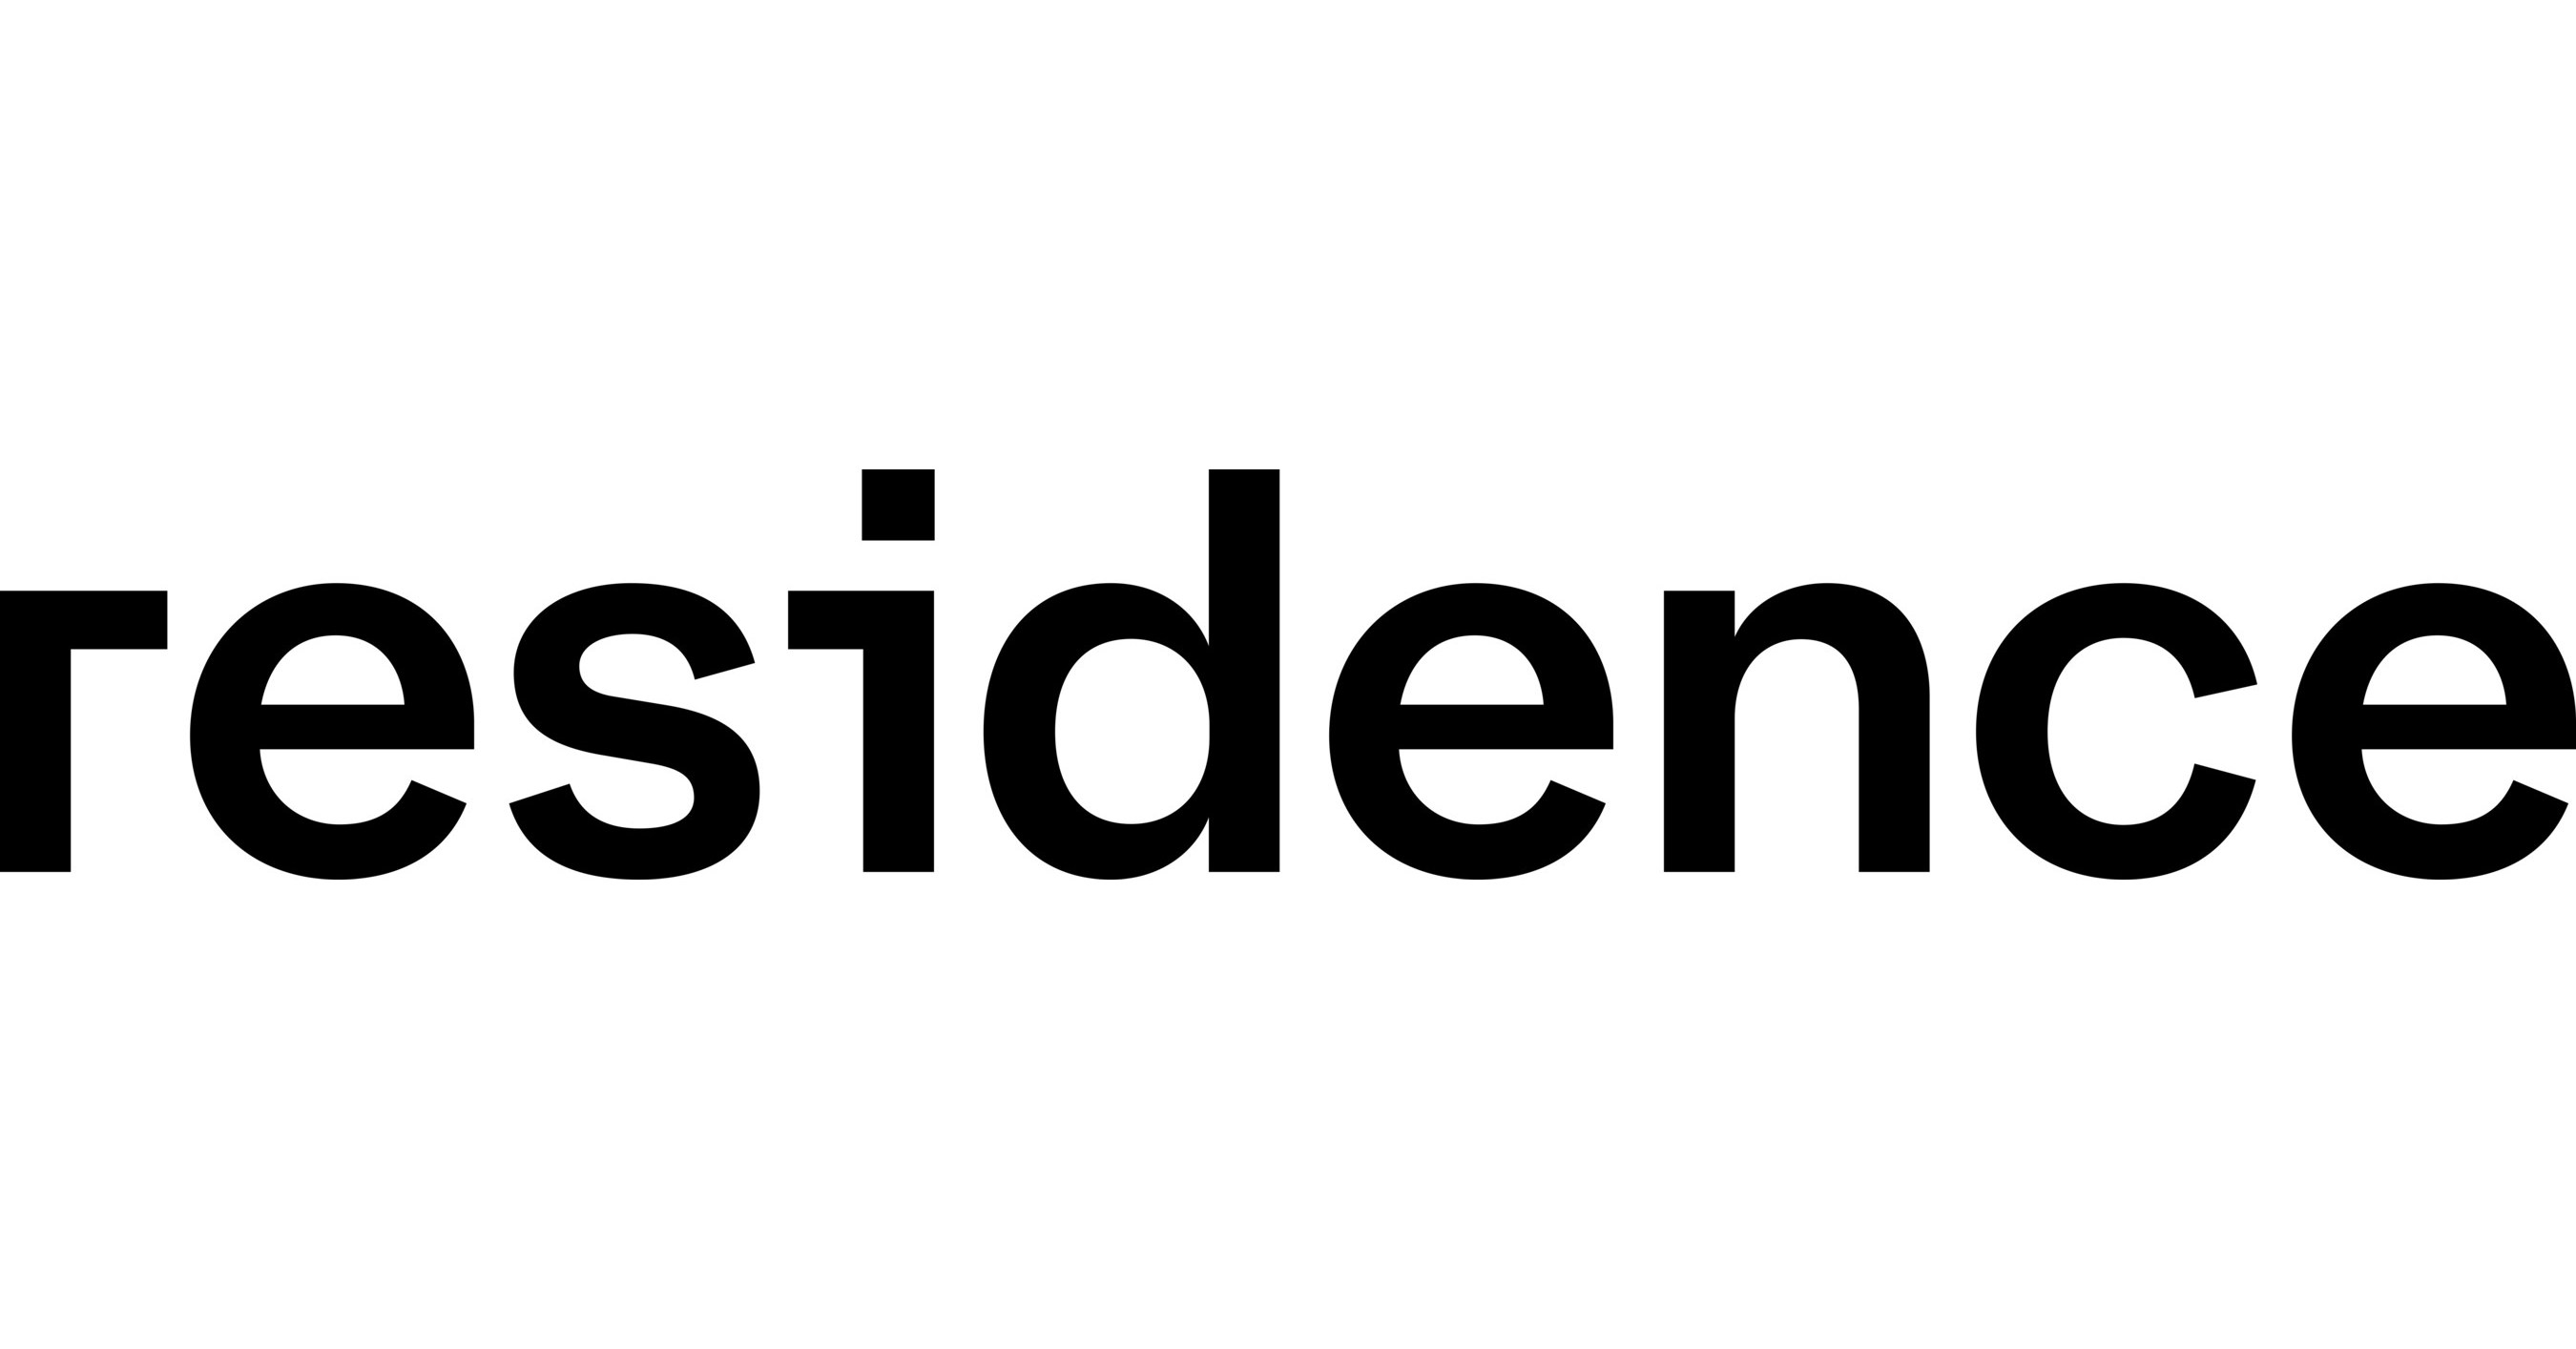 Introducing RESIDENCE, A Group of Multidisciplinary Companies Empowering the Creative Community